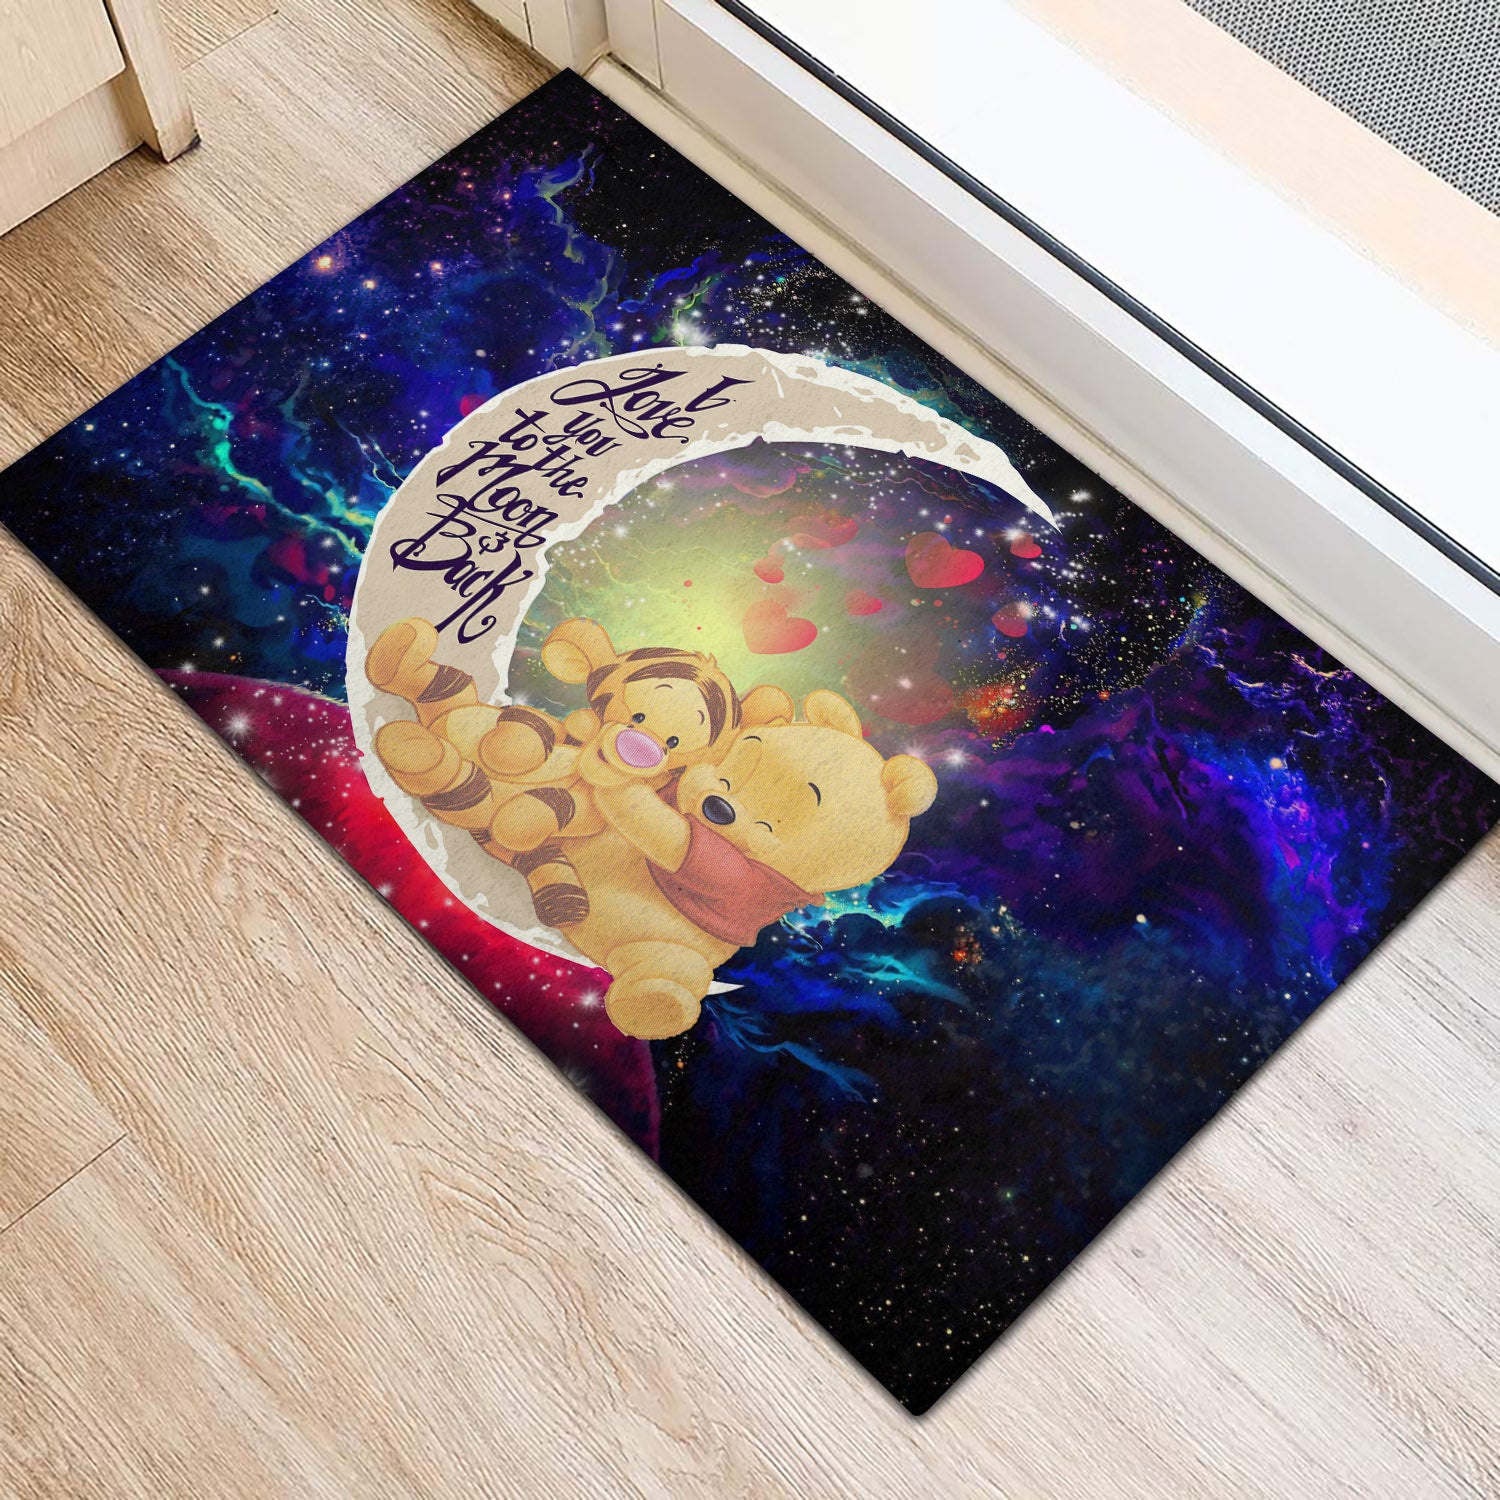 Winnie The Pooh Love You To The Moon Galaxy Back Door Mats Home Decor